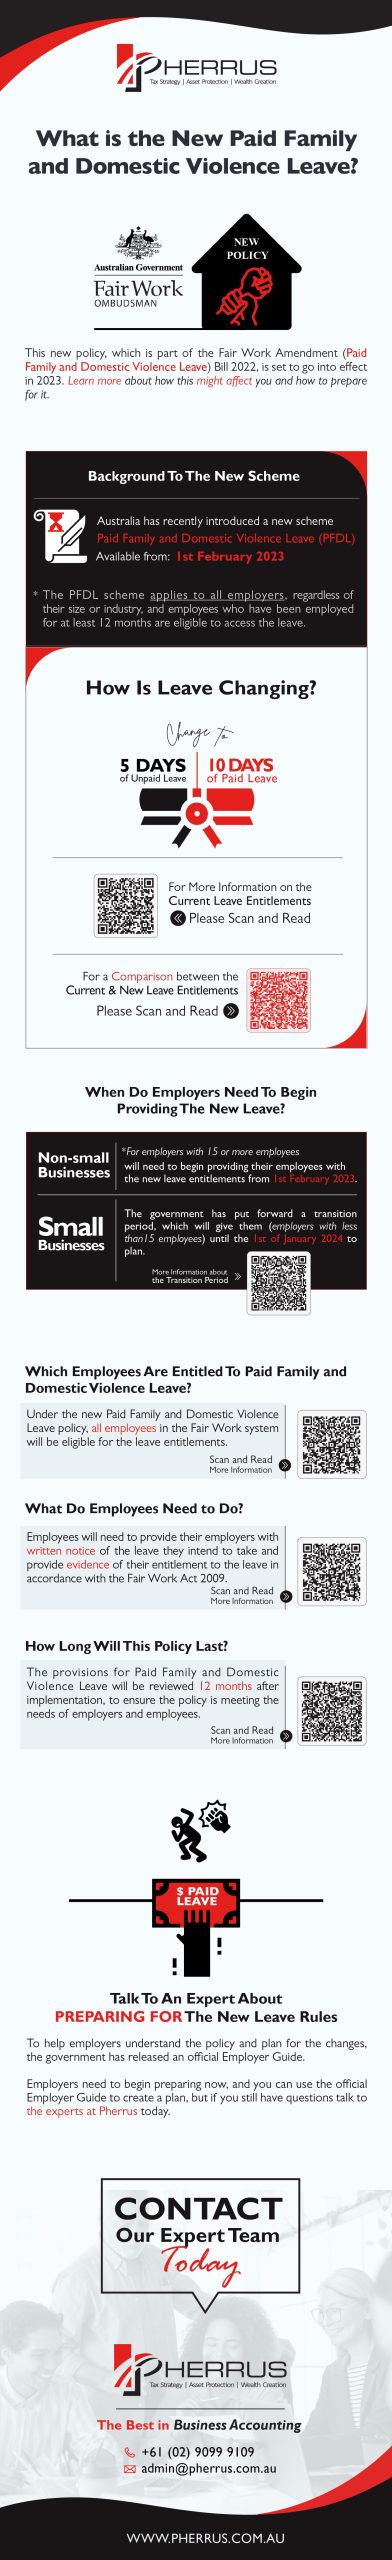 New Paid Family and Domestic Violence Leave - What You Need To Know infographic